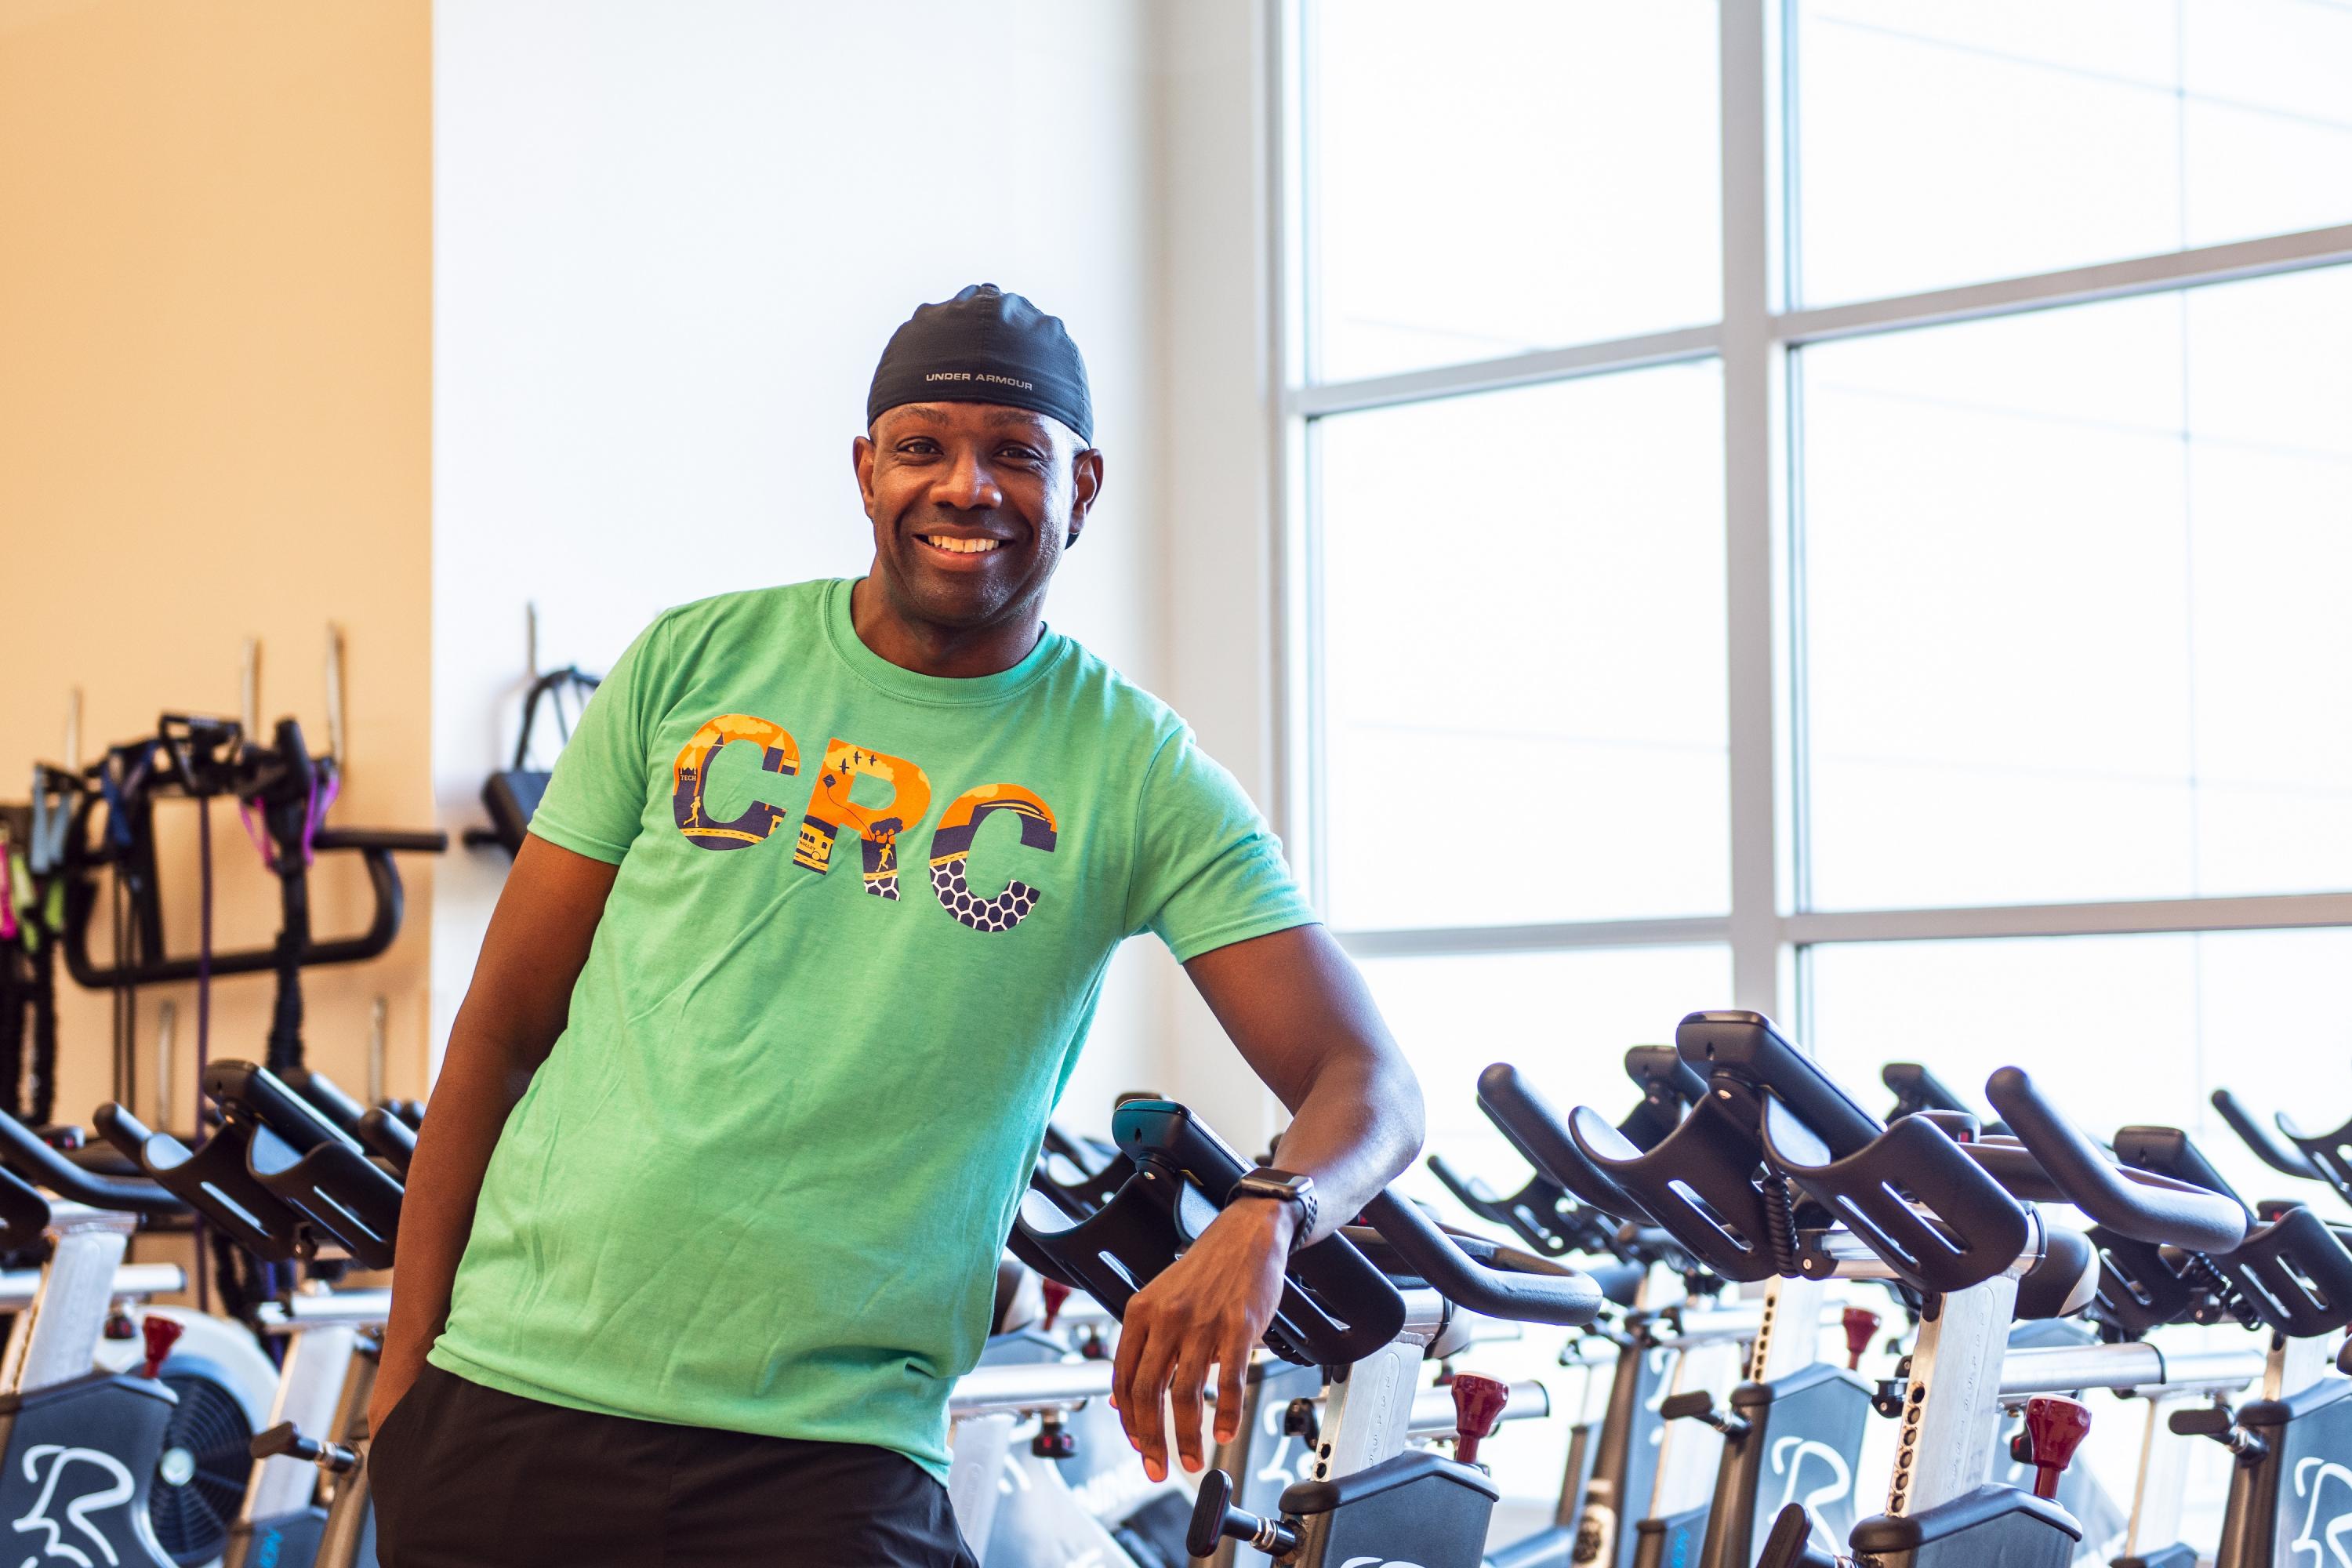 CRC is offering virtual classes from its fitness instructors.